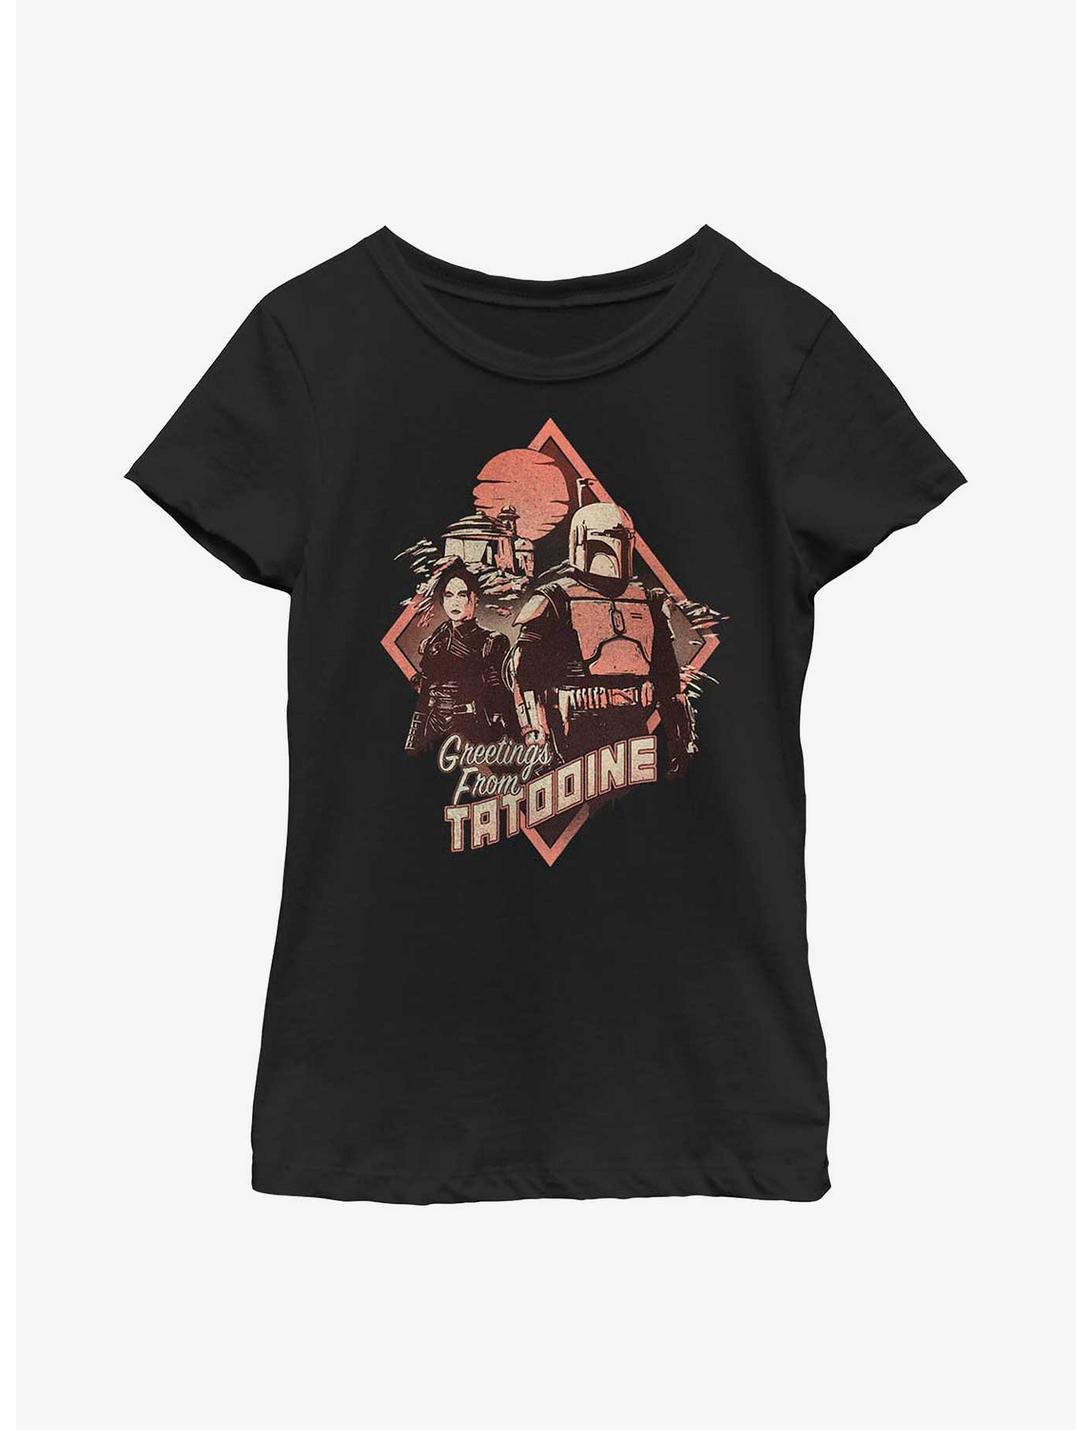 Star Wars: The Book Of Boba Fett Greetings From Tatooine Fennec & Boba Youth Girls T-Shirt, BLACK, hi-res